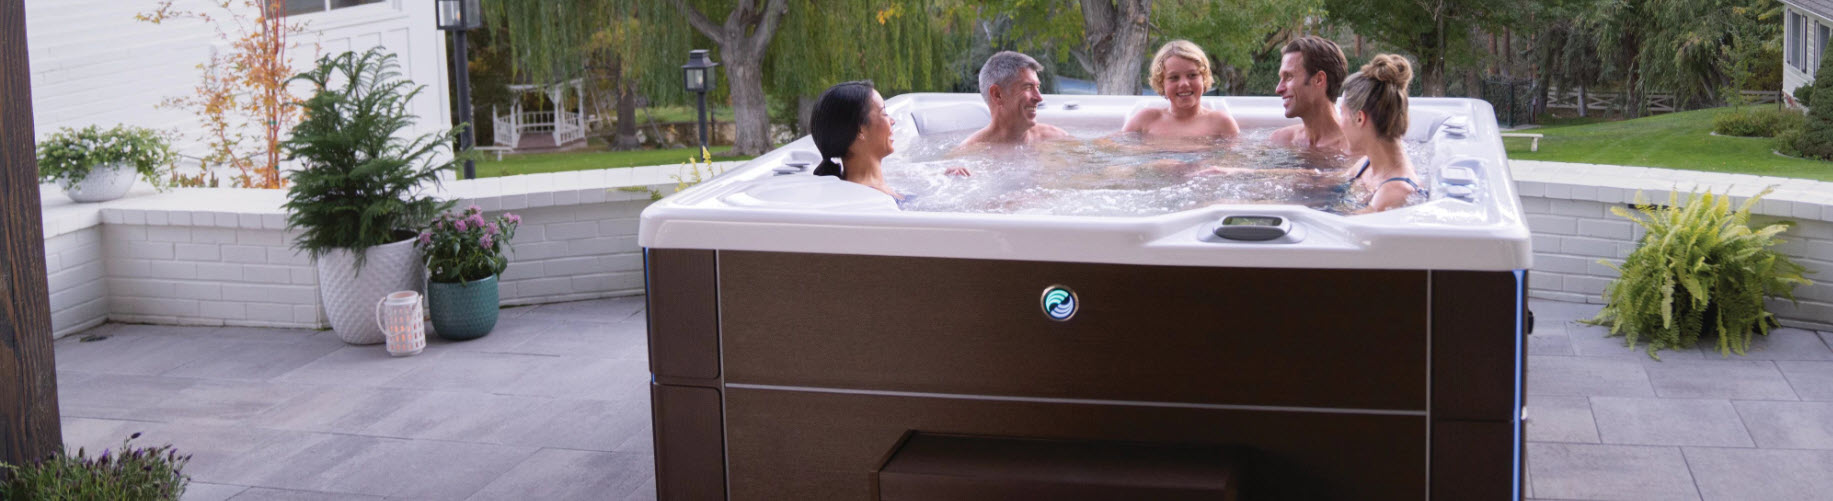 Fast, All-Natural Pain Relief with a Hot Tub at Home, Best Hot Tub Dealers Brookfield WI